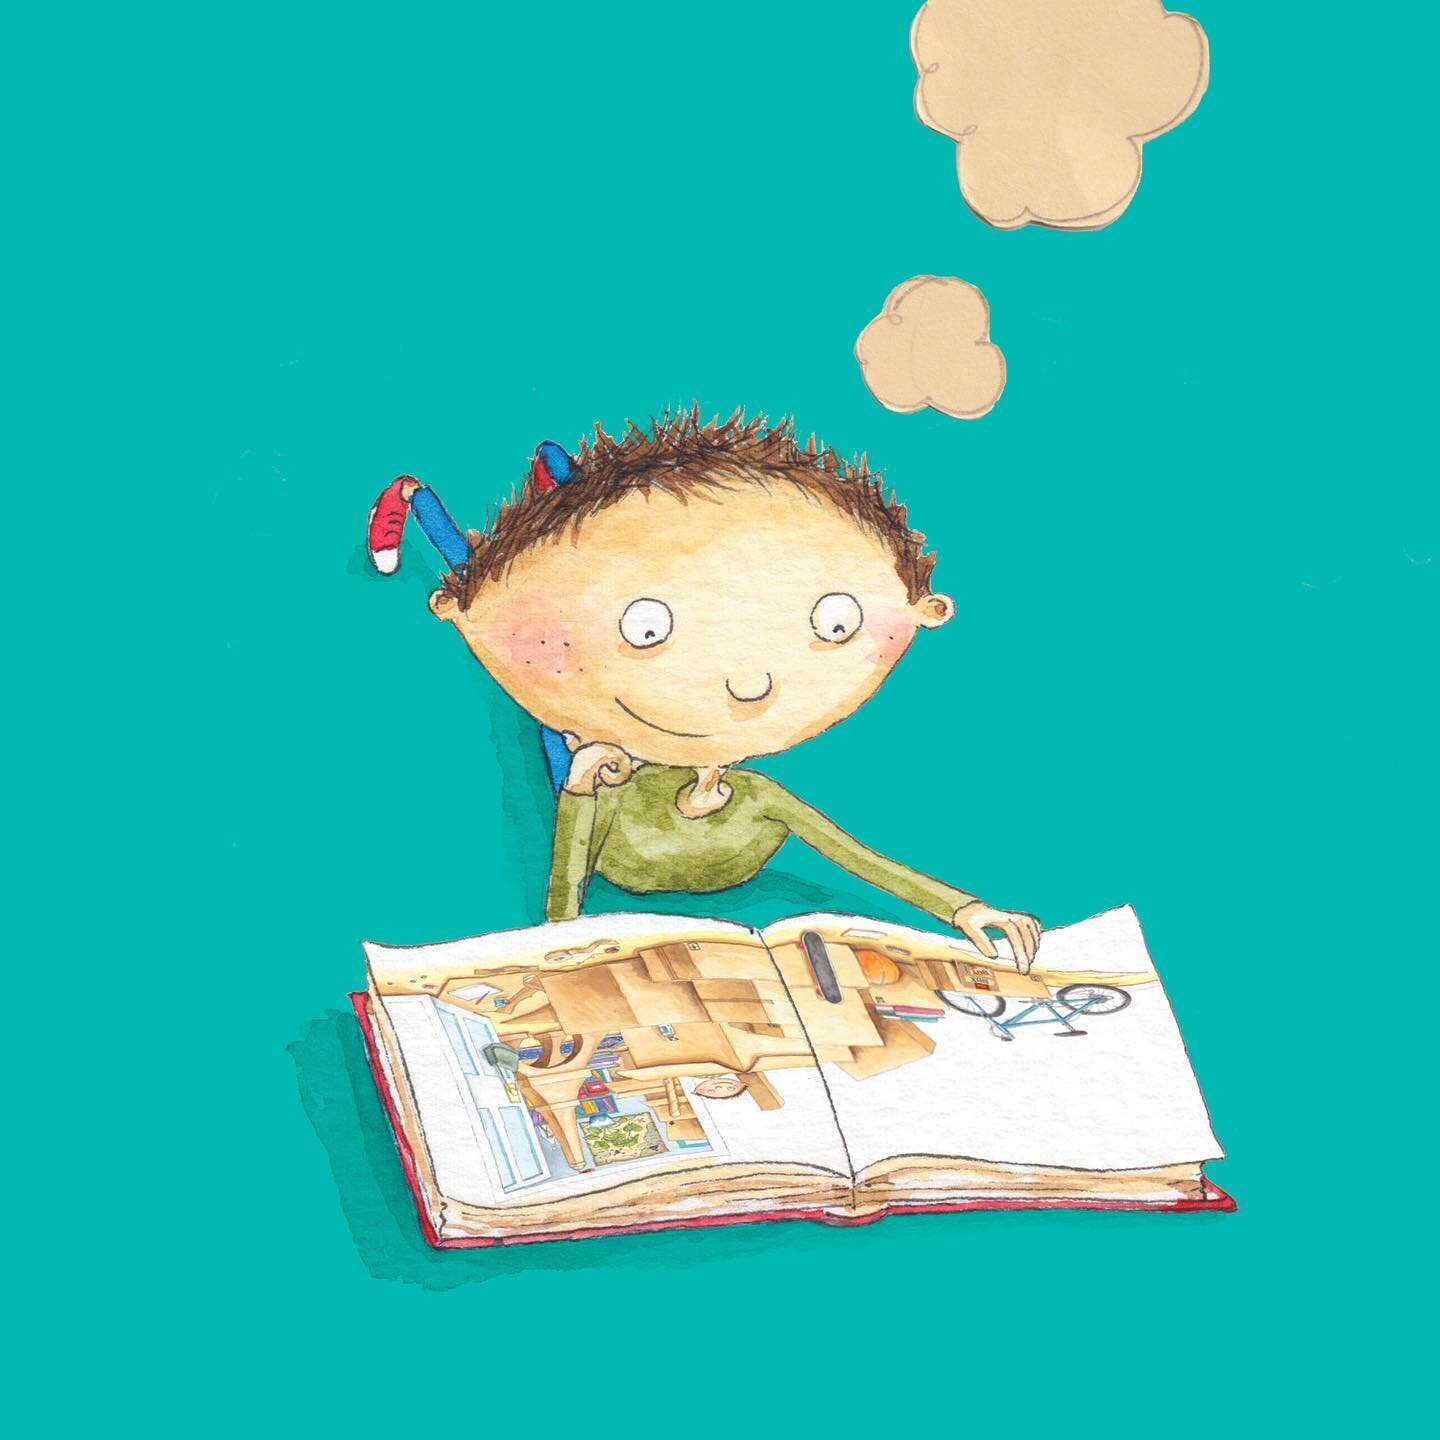 I&rsquo;m a bit late to the party, but happy #WorldBookDay! Enjoy making time to escape into the world within a book!

#shipahoyboxboy #kidlitart @windyhollow